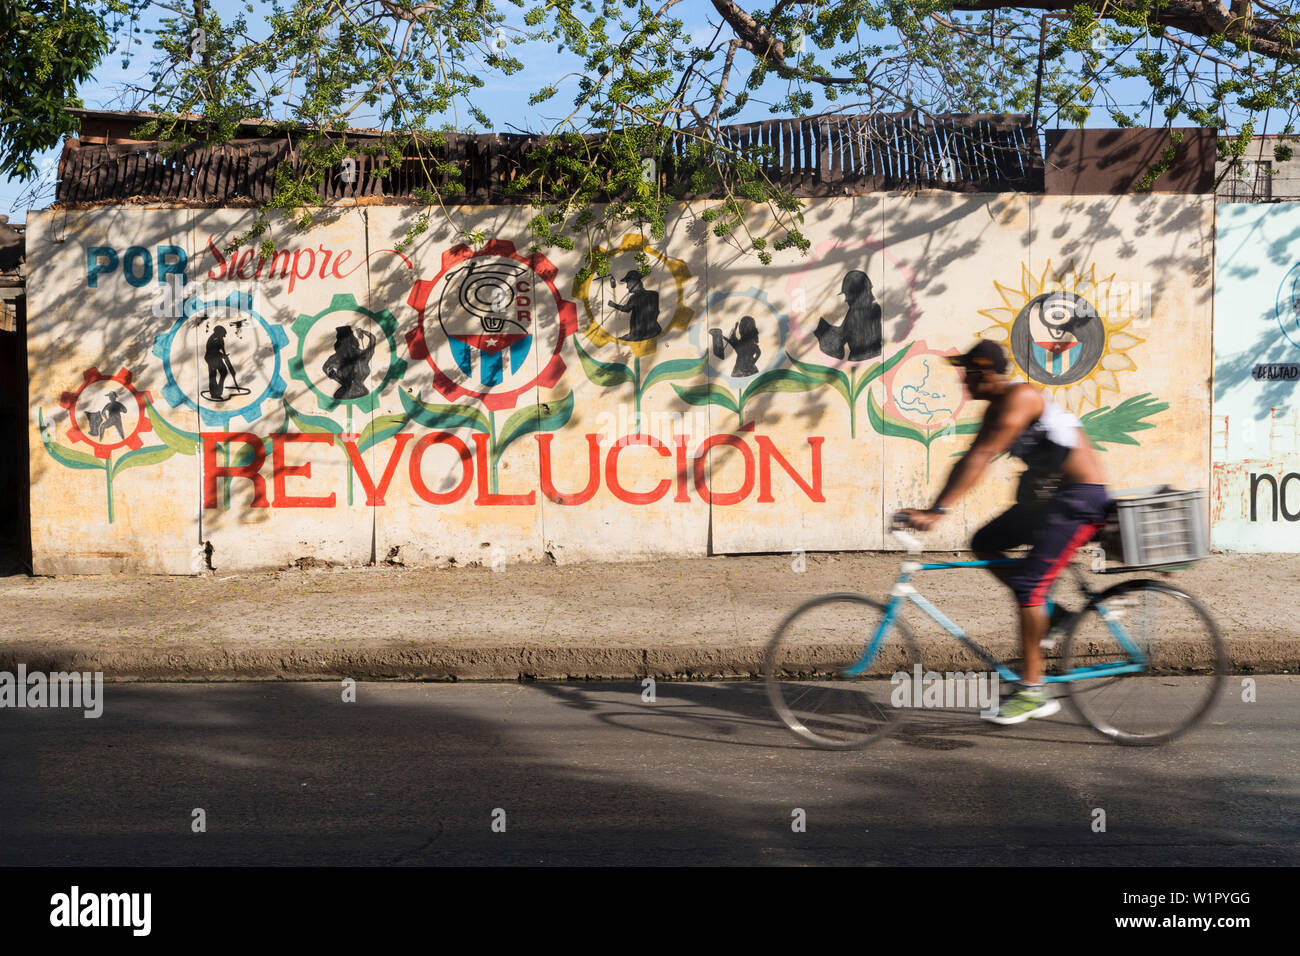 bicycle on an empty street, graffiti with Revolution written on the wall, por Siempre Revolucion, colonial town, family travel to Cuba, parental leave Stock Photo